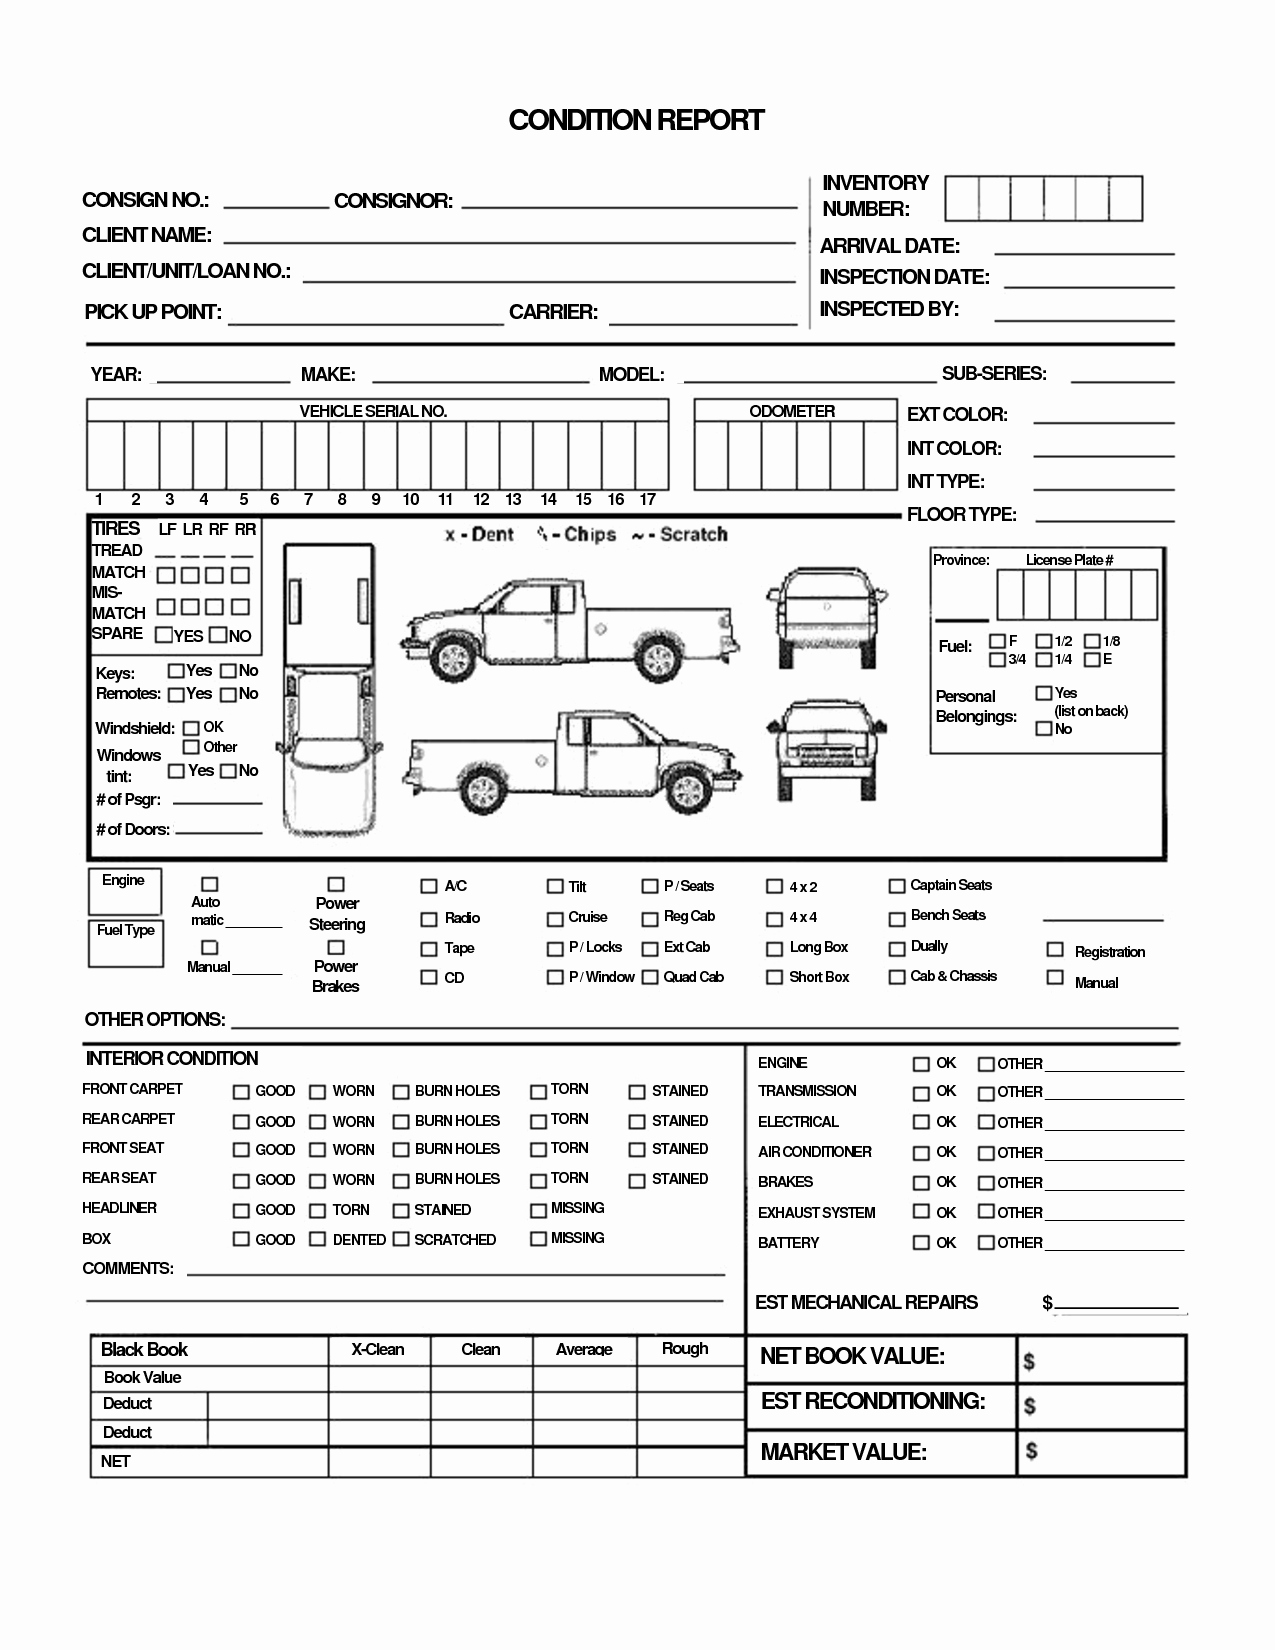 Vehicle Condition Report Template Awesome Inspection form Templates Free Vehicle Sheet Template Car